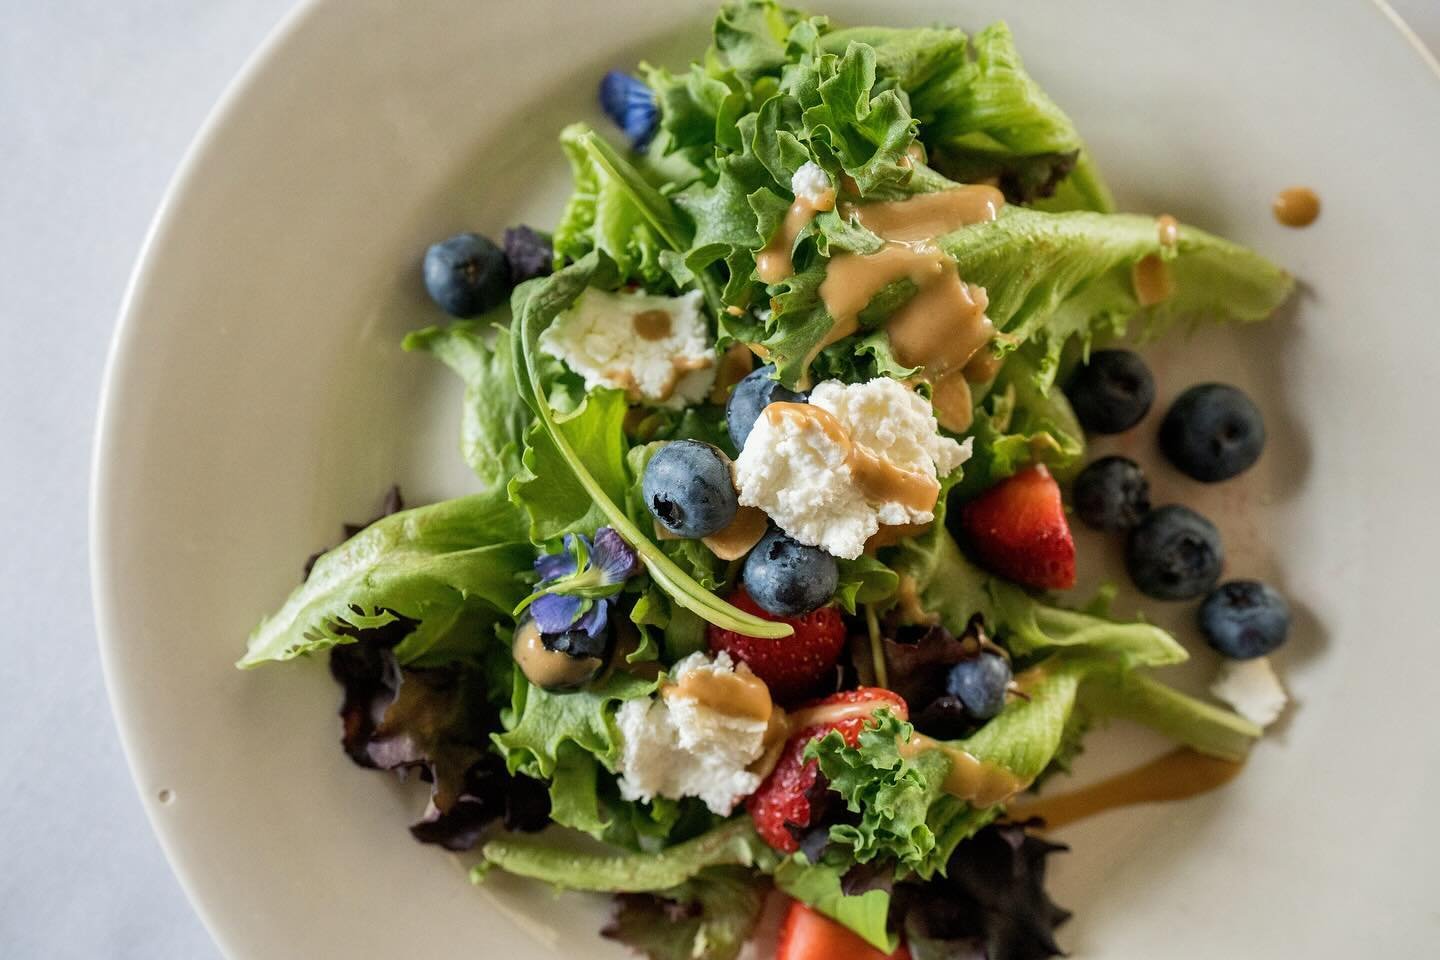 Give your guests a taste of Maine with every bite.🫐🍁 Fresh Maine blueberries and a maple balsamic vinaigrette in our starter salad makes for a colorful, fresh, and delicious option to start your dinner service, packed with local ingredients! 

&bul